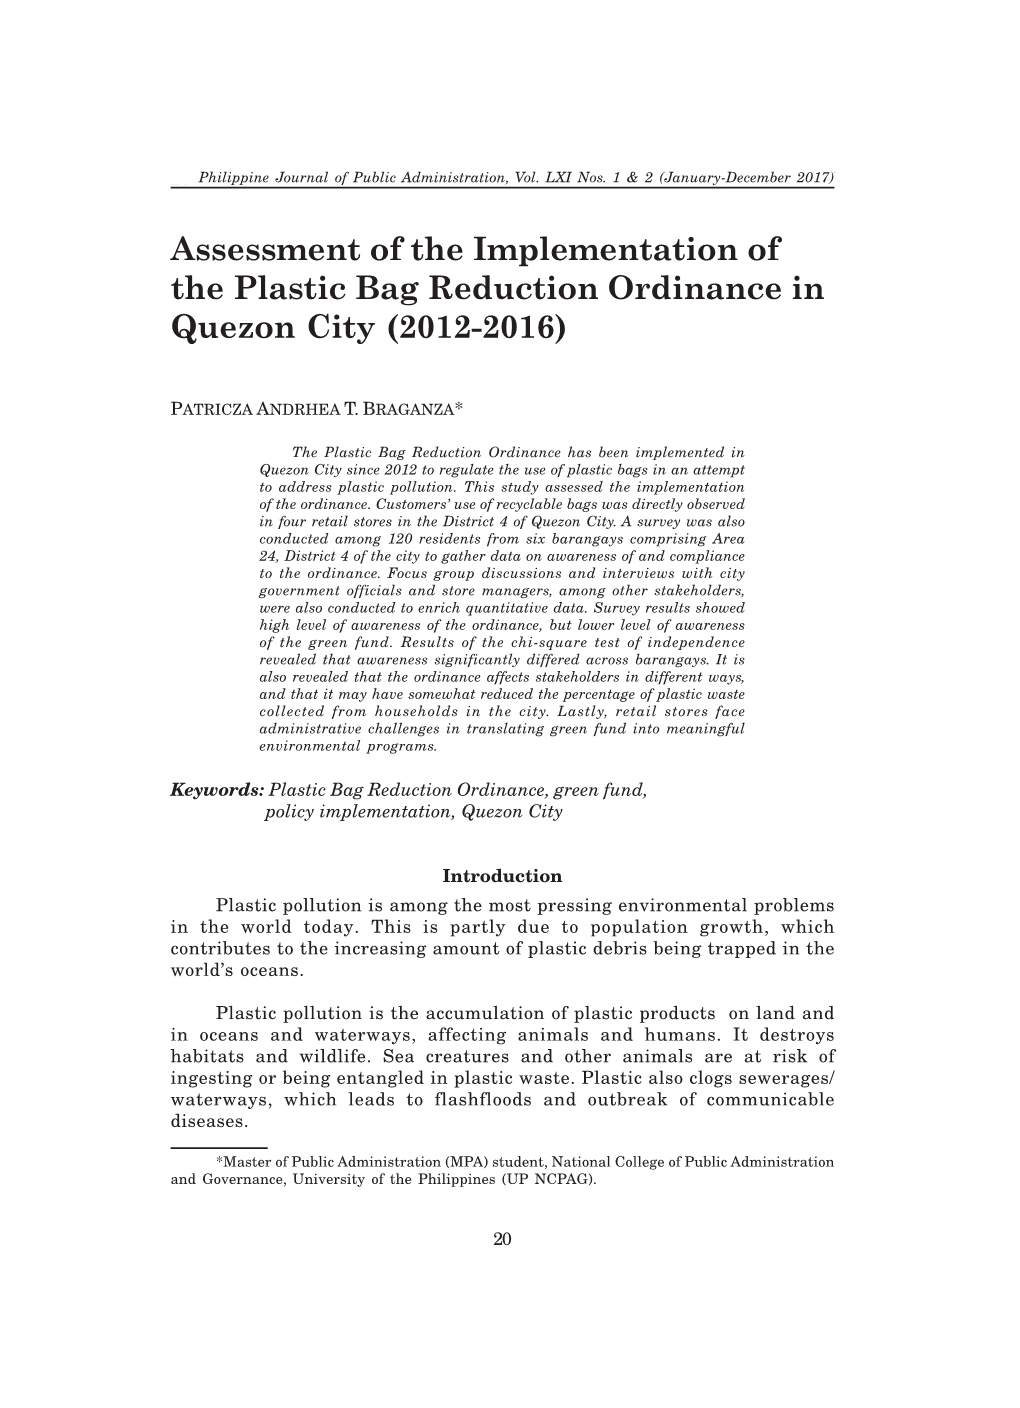 Assessment of the Implementation of the Plastic Bag Reduction Ordinance in Quezon City (2012-2016)